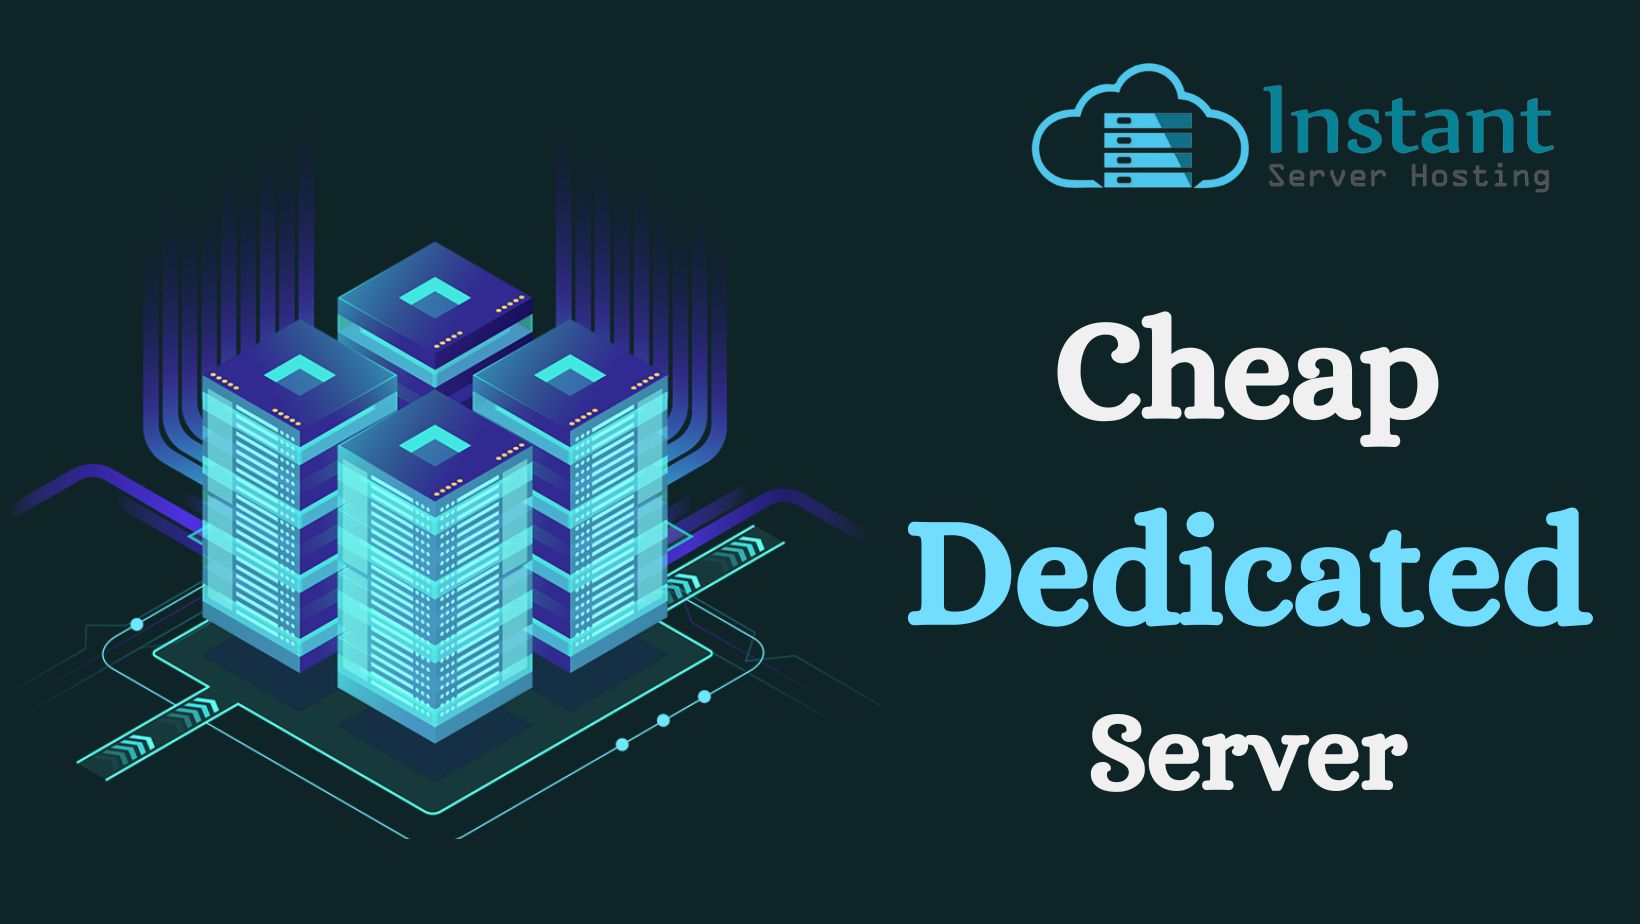 The features and benefits of Dedicated Server, VPS Hosting and Web Hosting